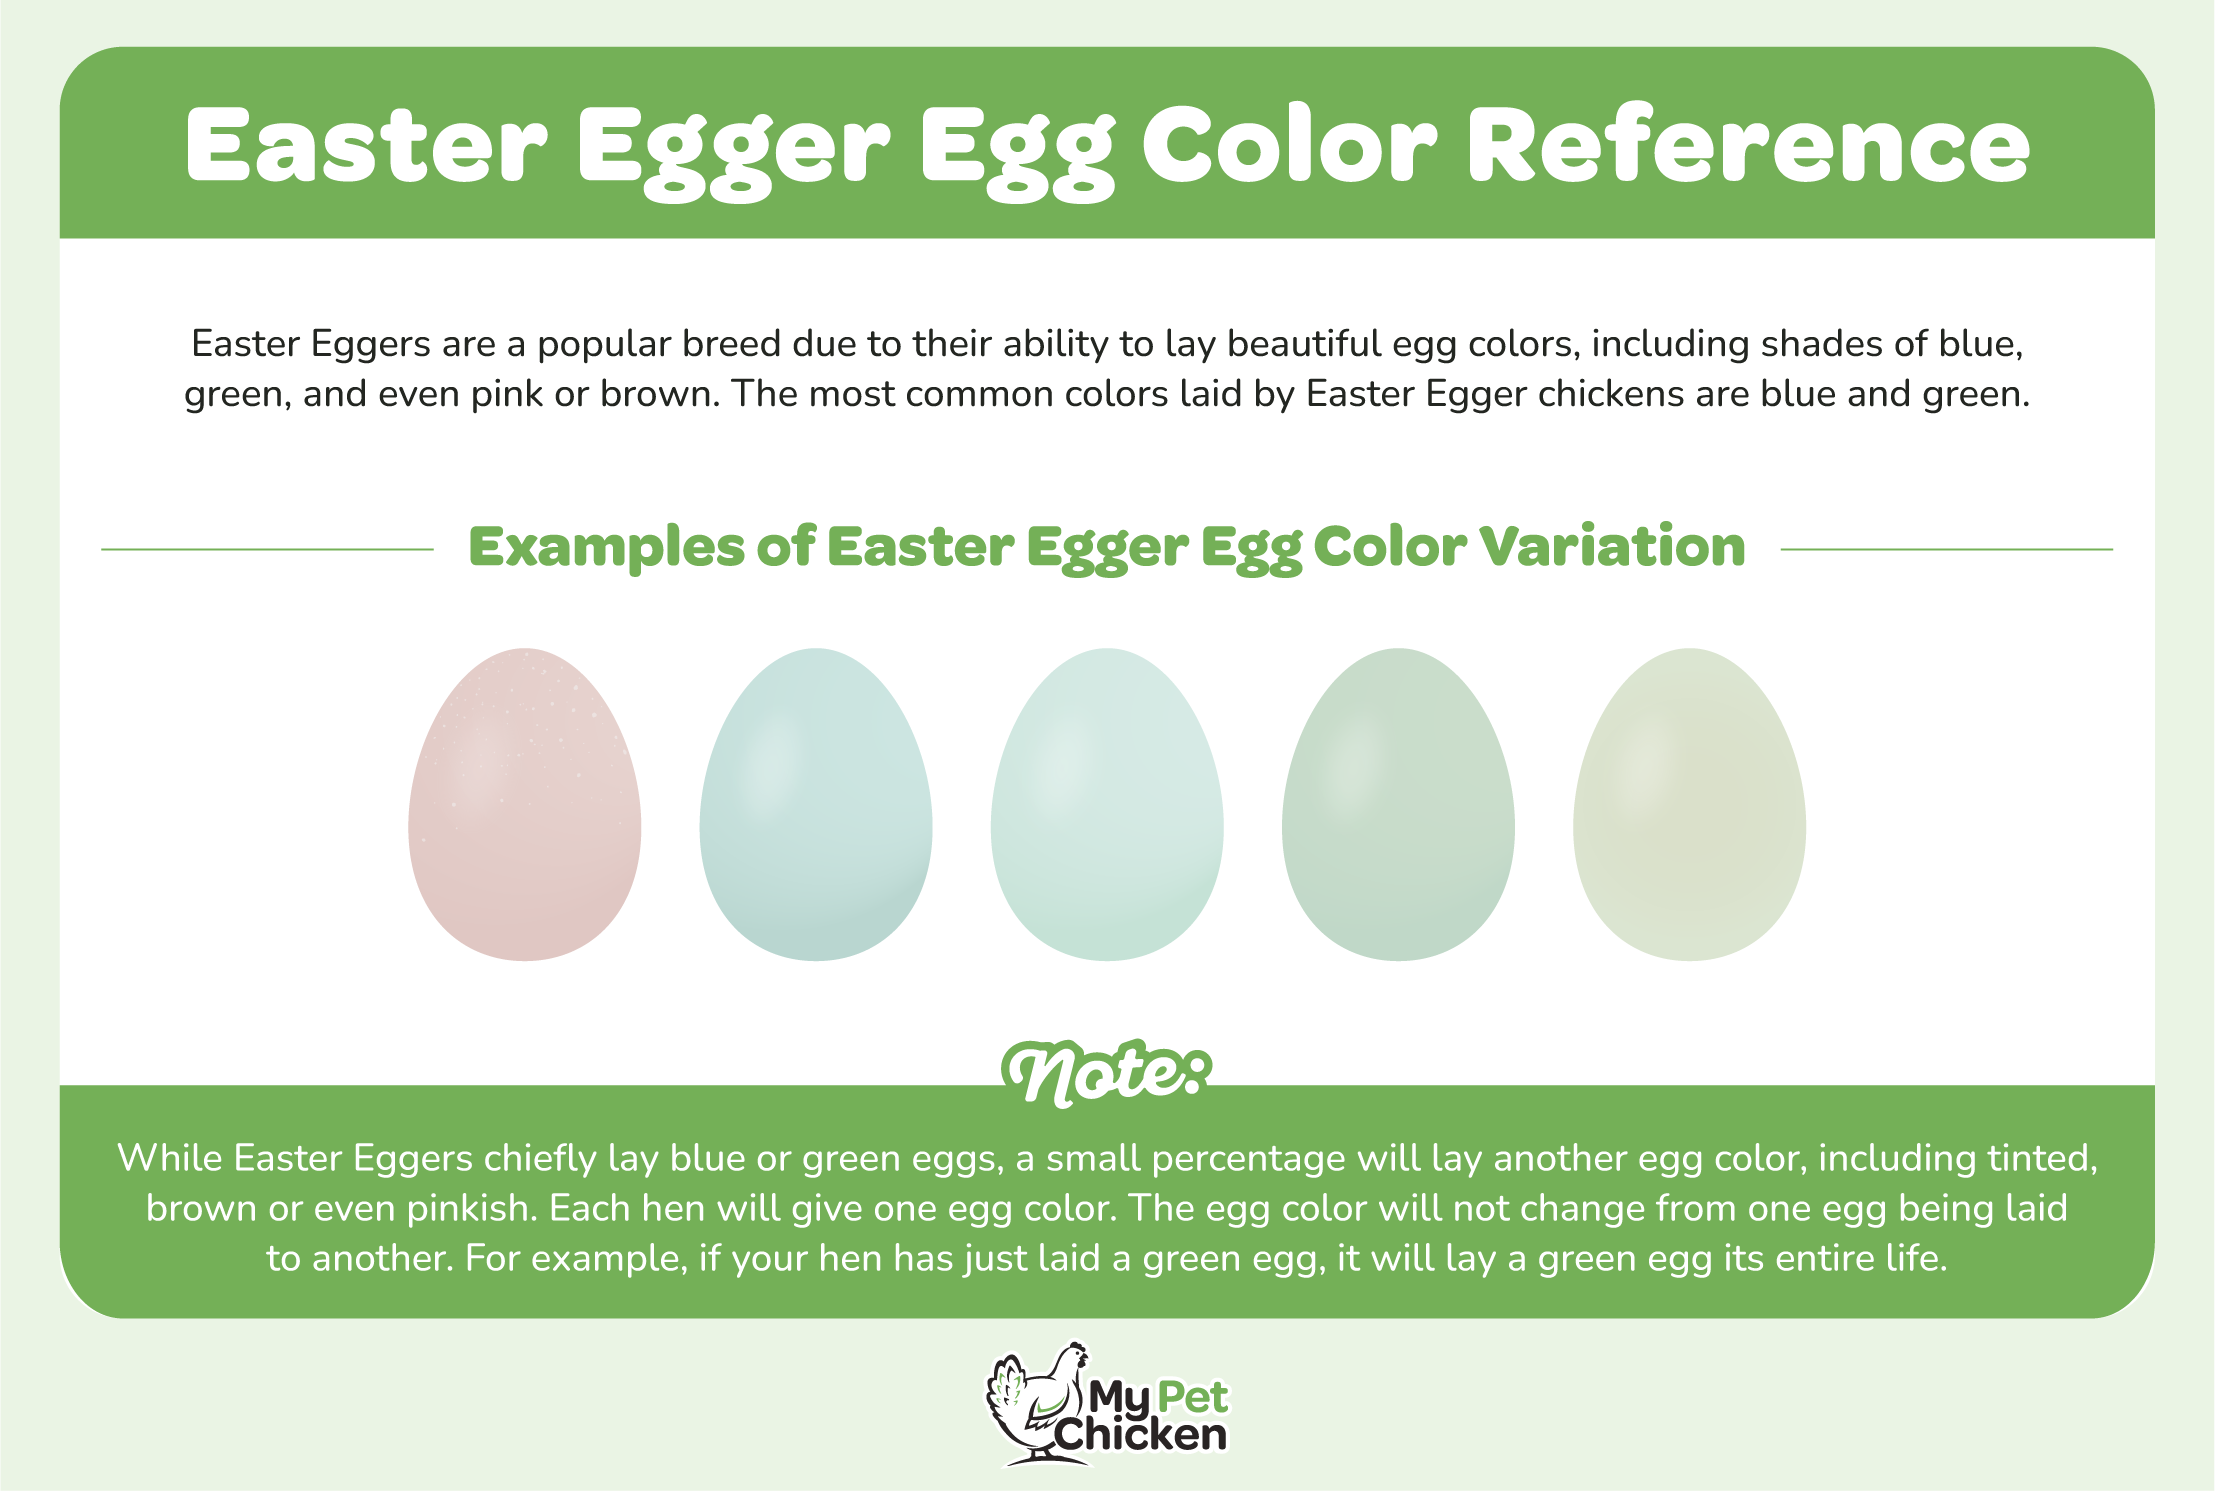 This Easter Eger Reference chart lets you know what colors to expect your hen to lay.